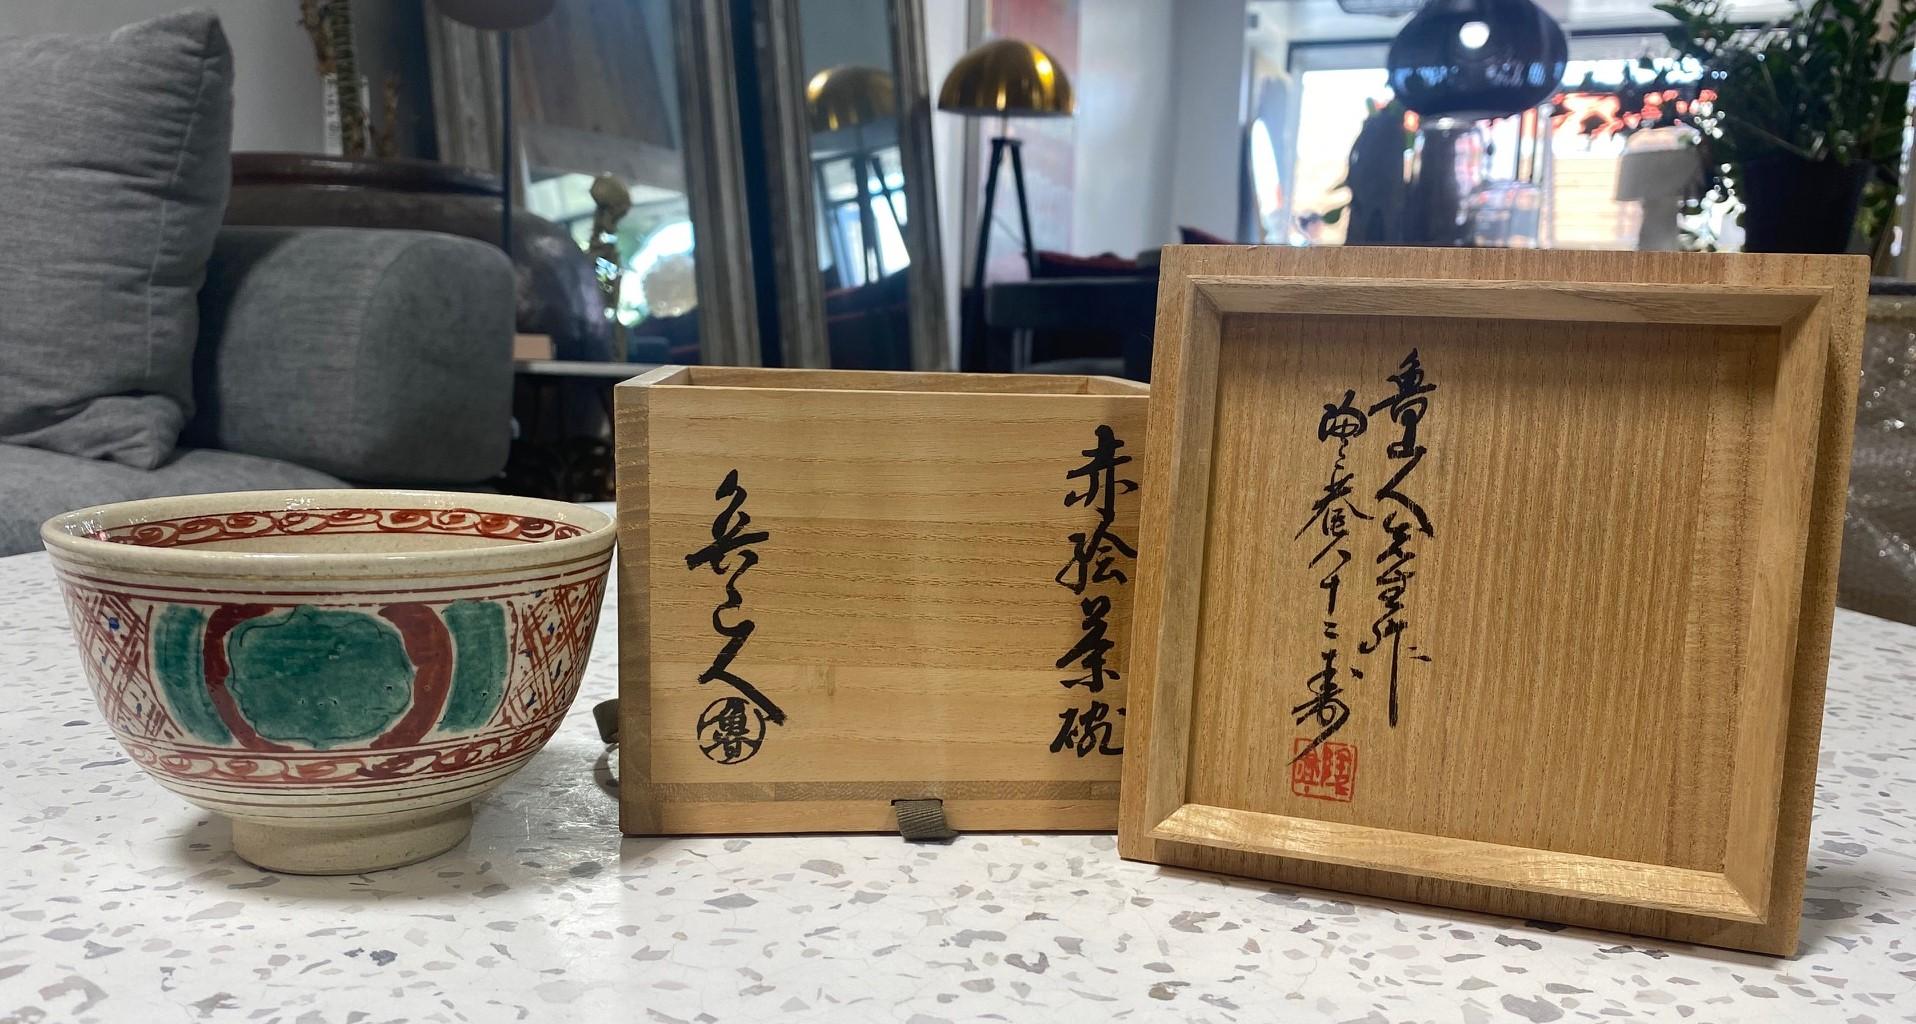 Rosanjin Kitaoji Signed Painted Chawan Tea Bowl with Original Sealed Signed Box For Sale 11